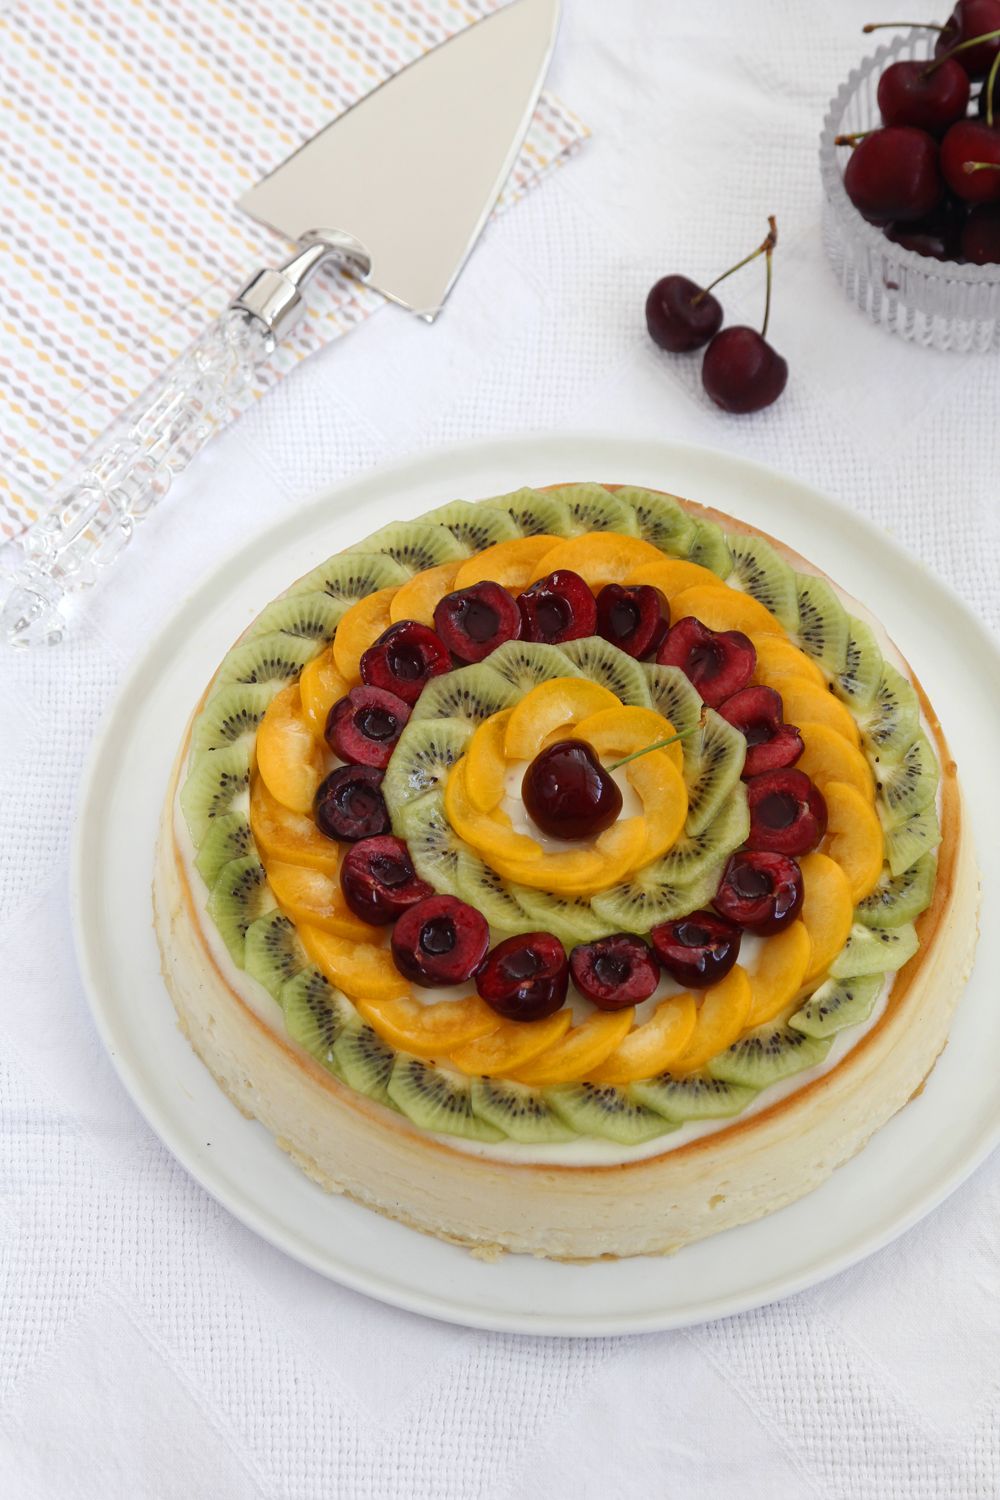 Gluten Free Cheesecake with Fruits